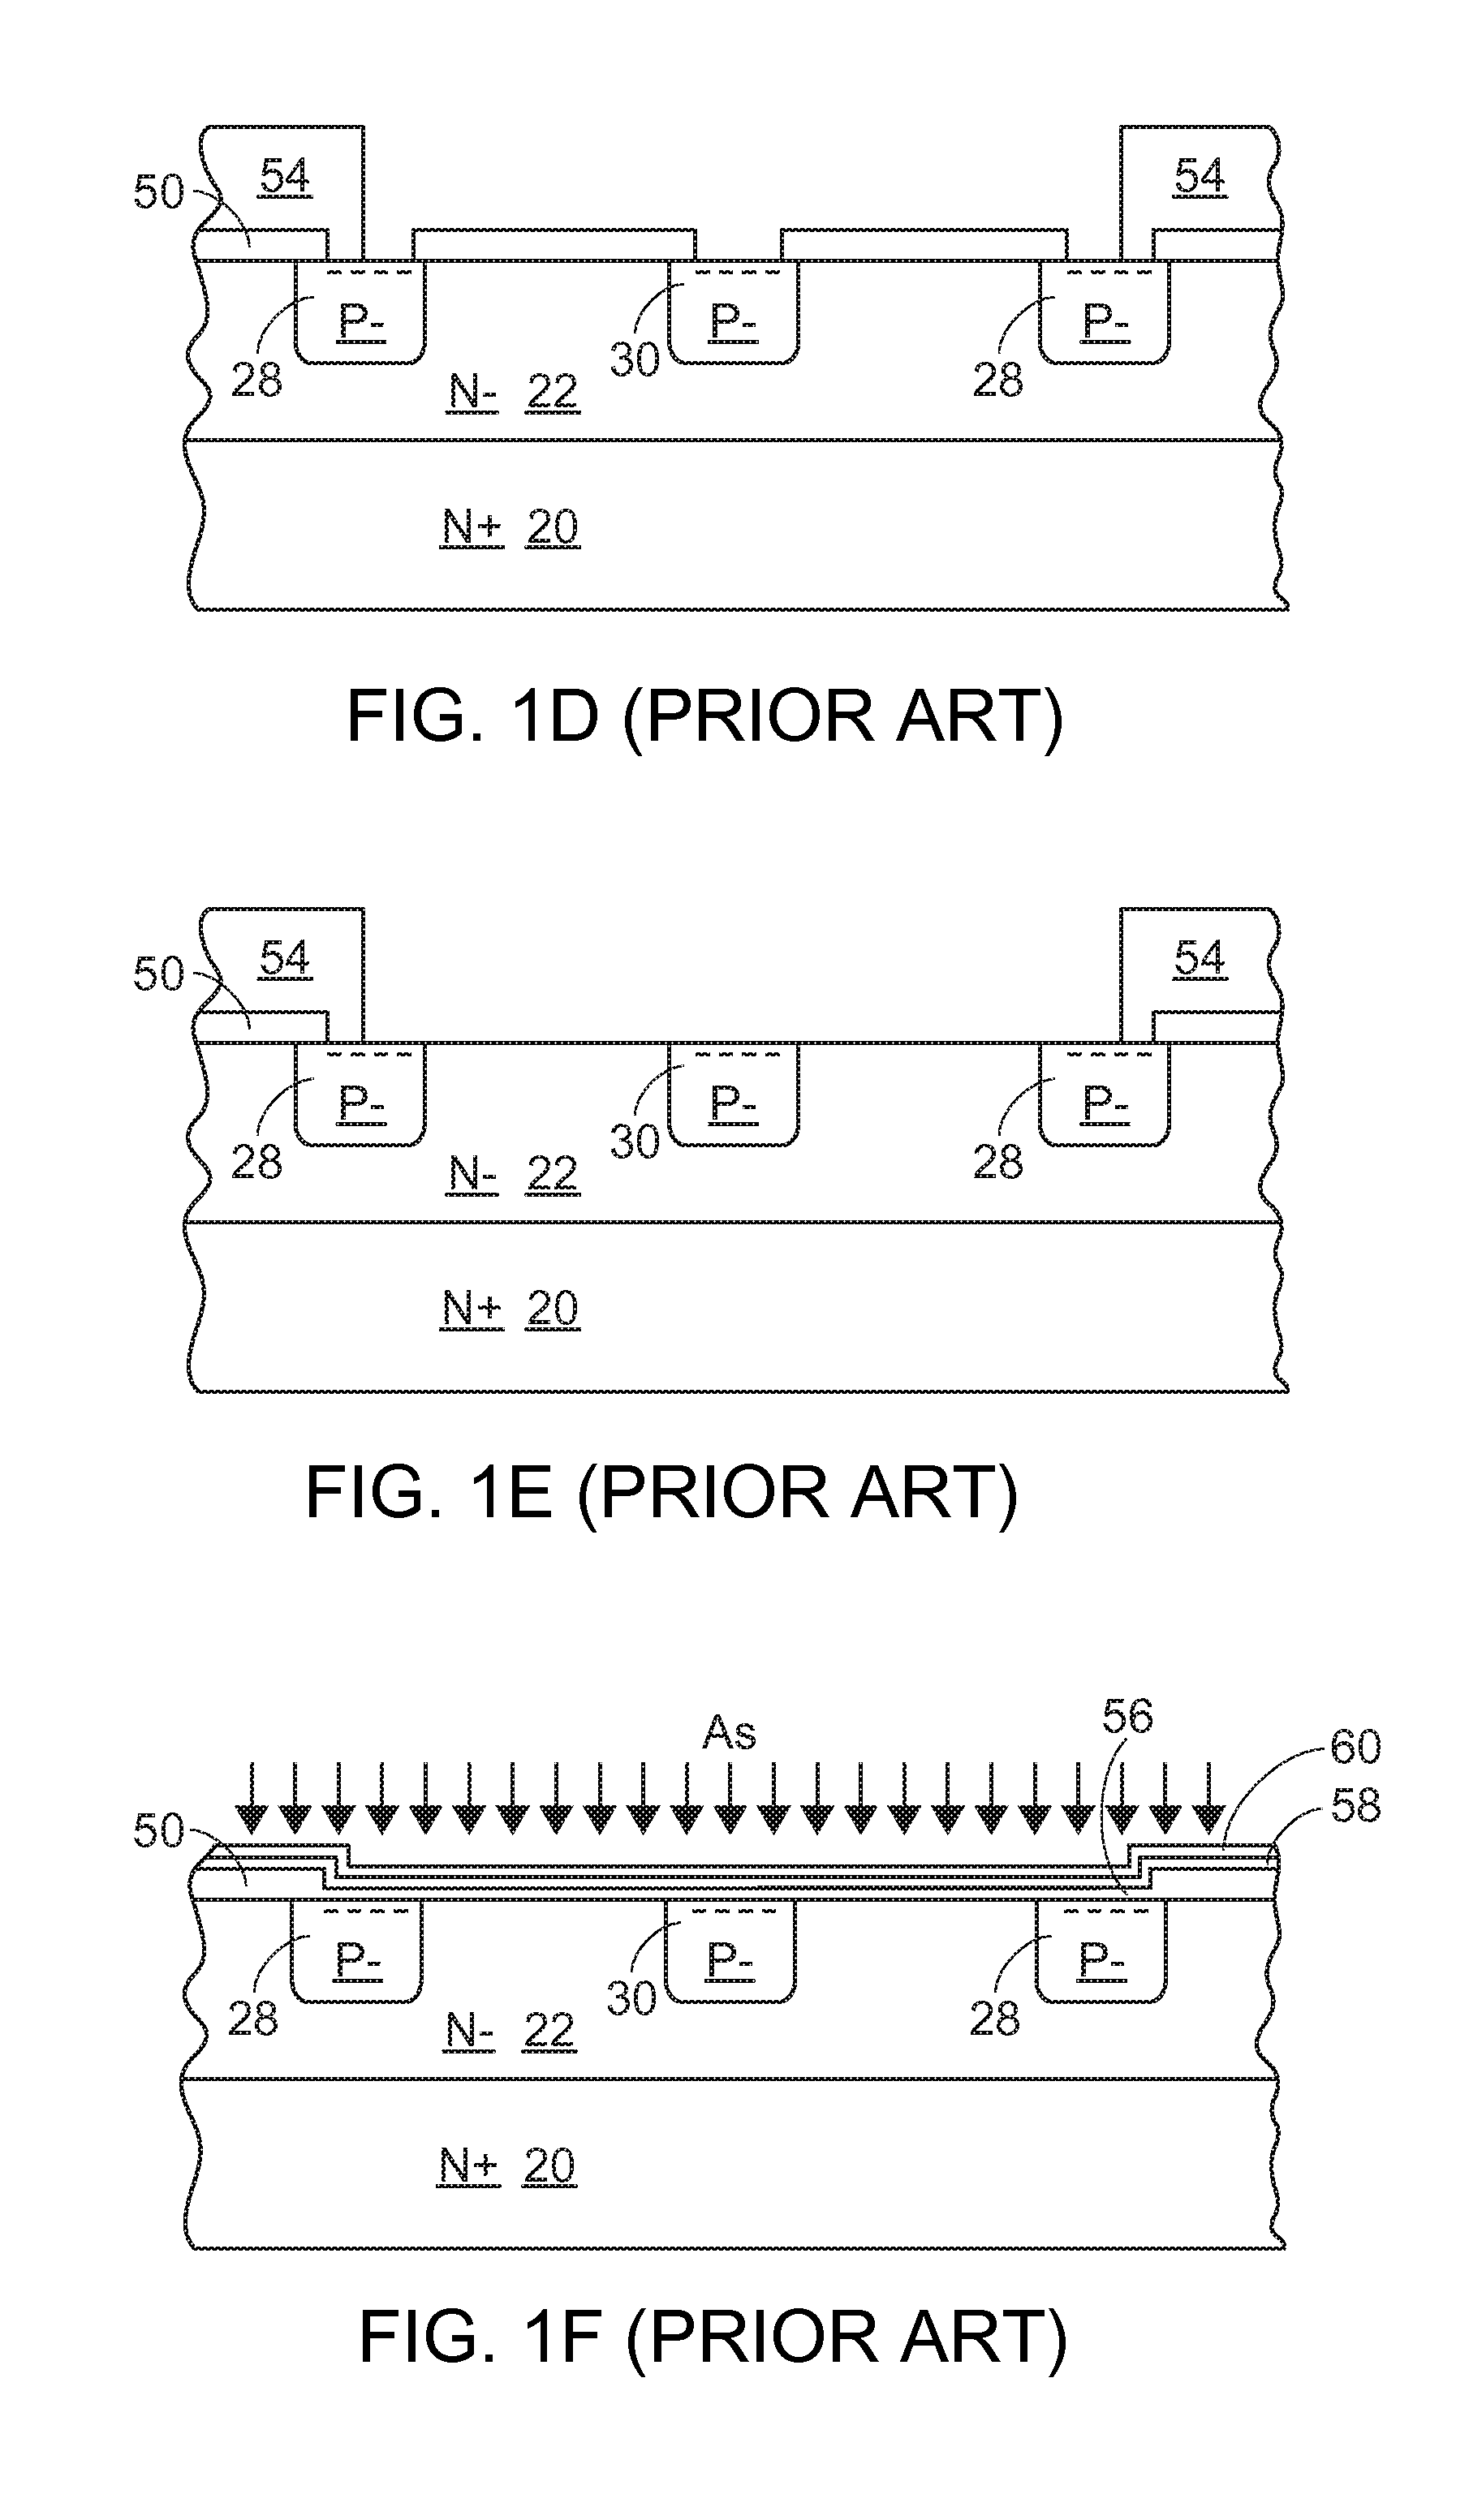 Trench isolation mos p-n junction diode device and method for manufacturing the same